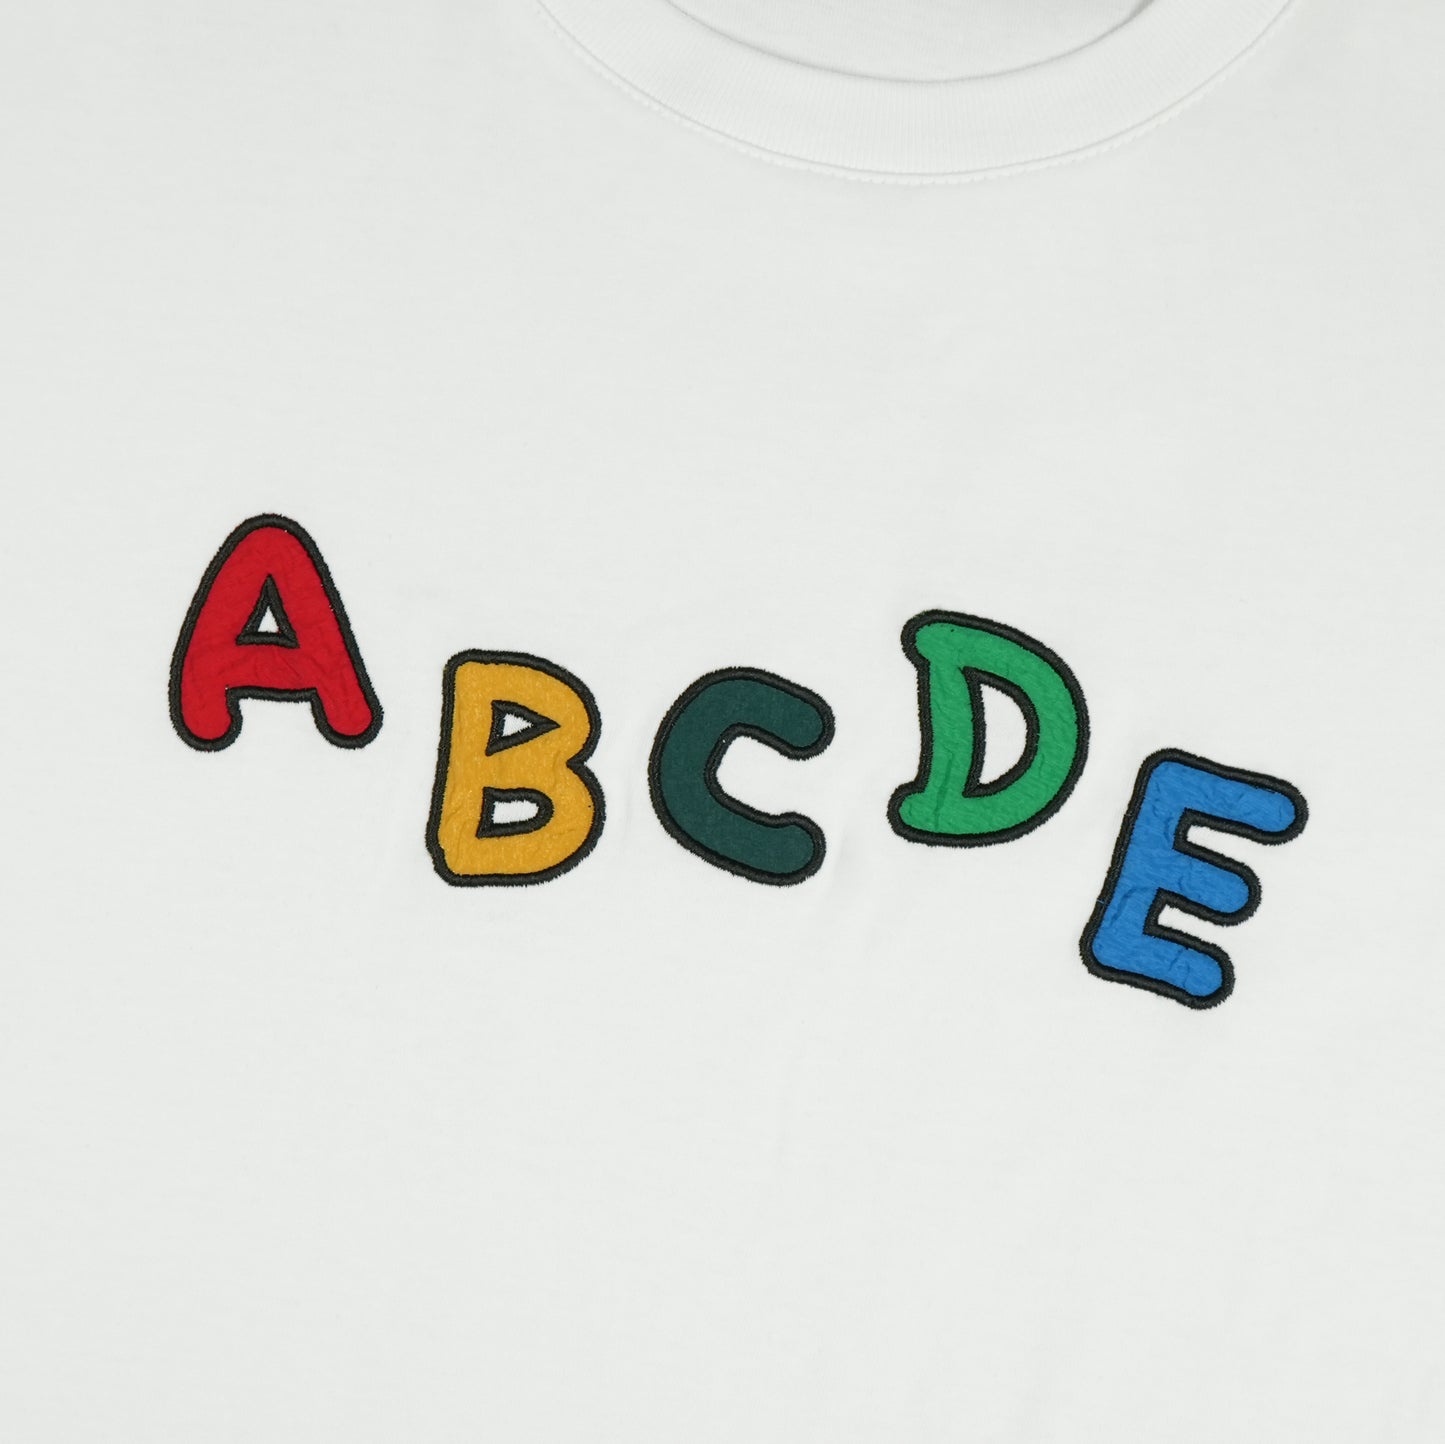 Toson, "ABCDE" Patchwork T-shirt